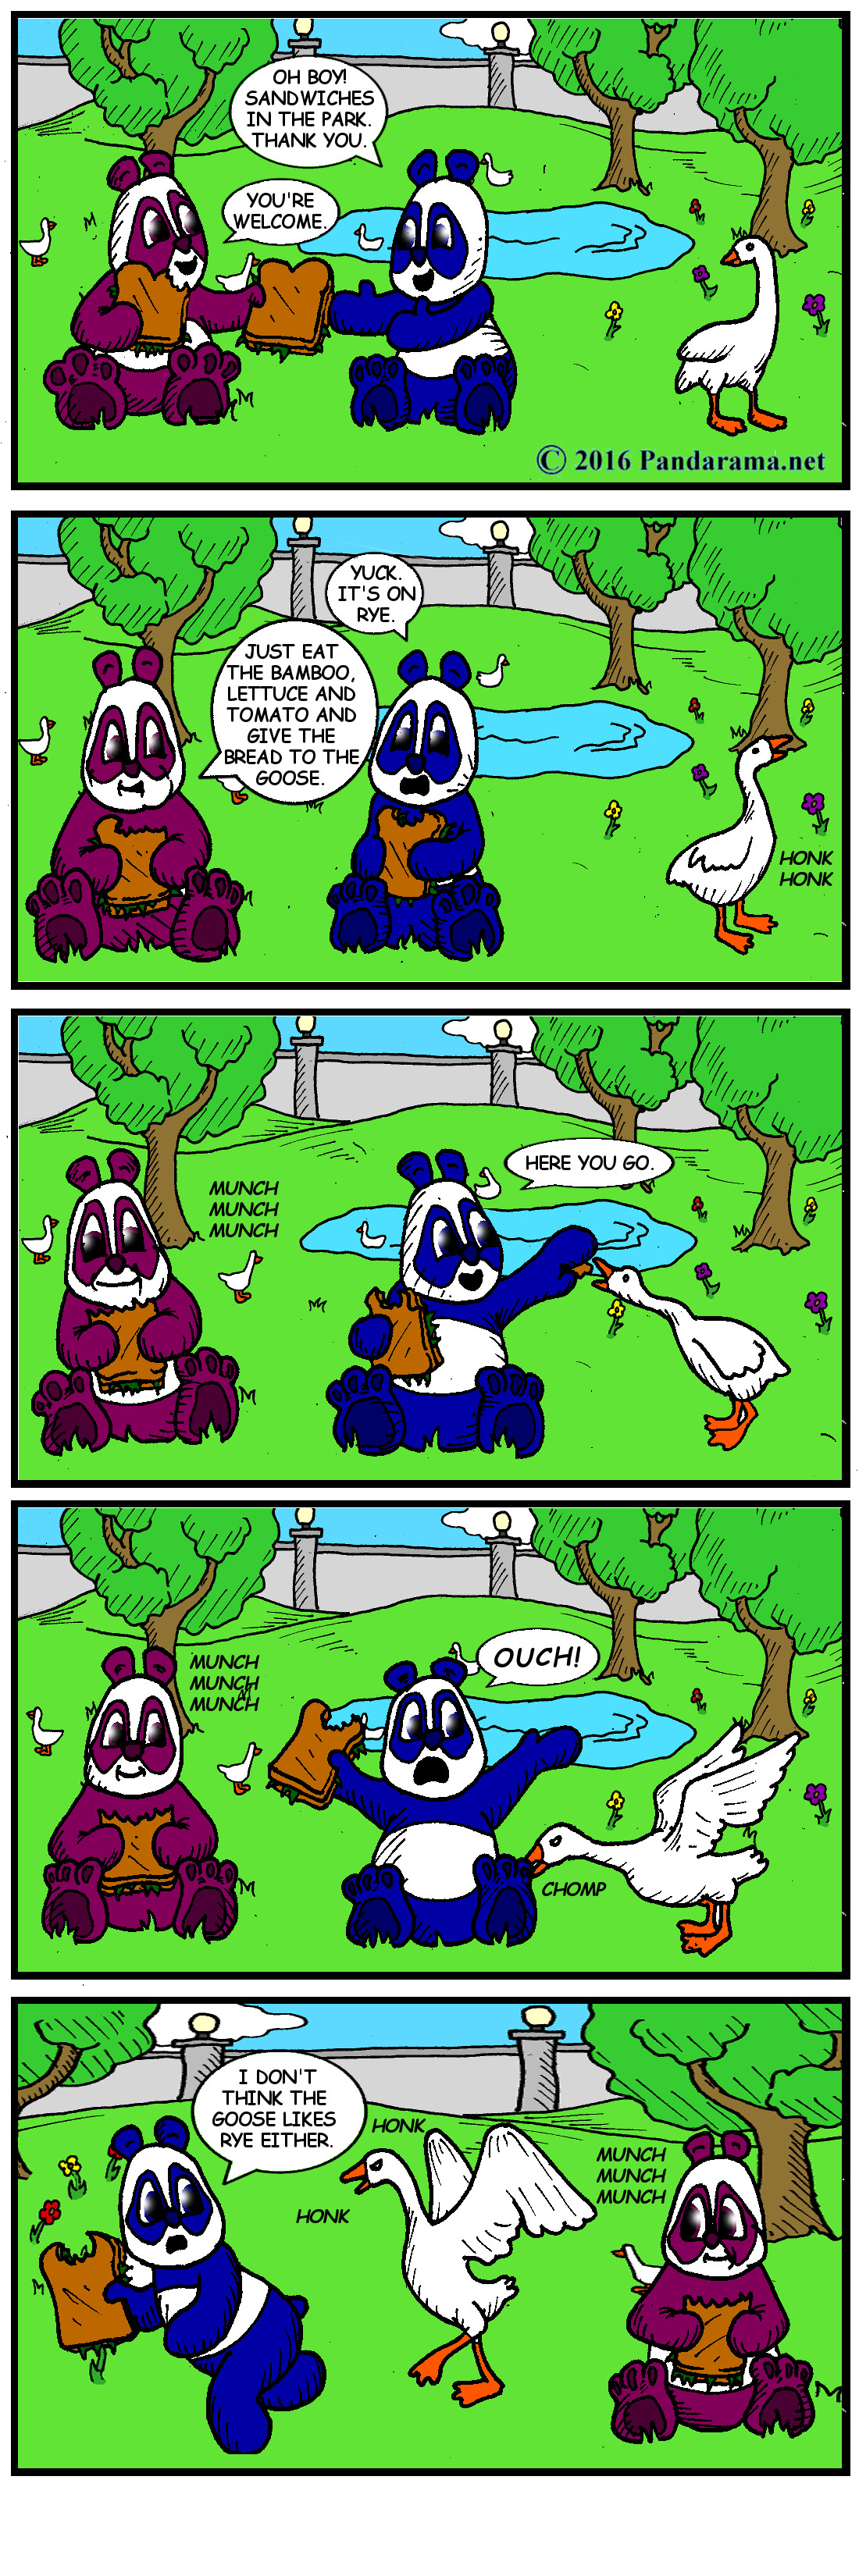 cartoon with pandas picnicking, one feeds some rye bread to a goose, and the goose attacks the panda, because the goose doesn't like rye either.